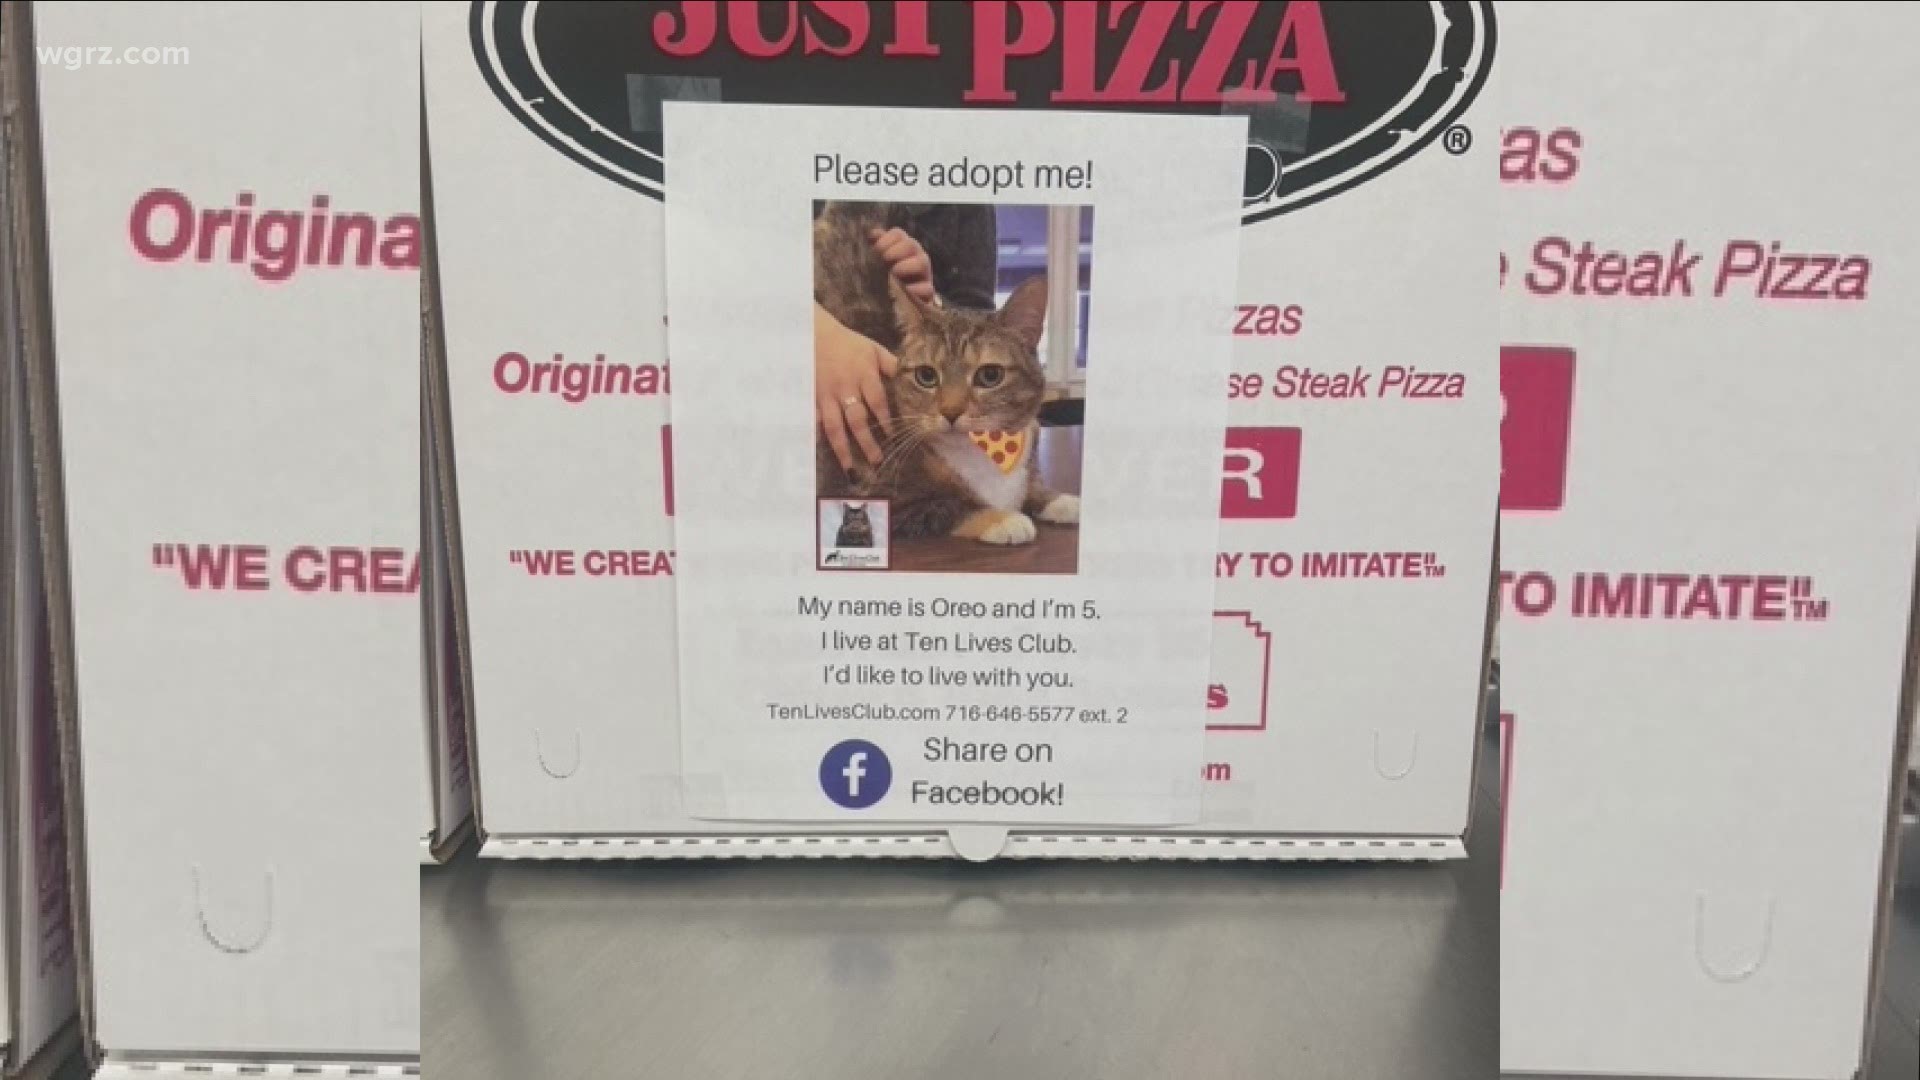 On National Pizza Day, you can order a pizza and help a cat at Just Pizza.